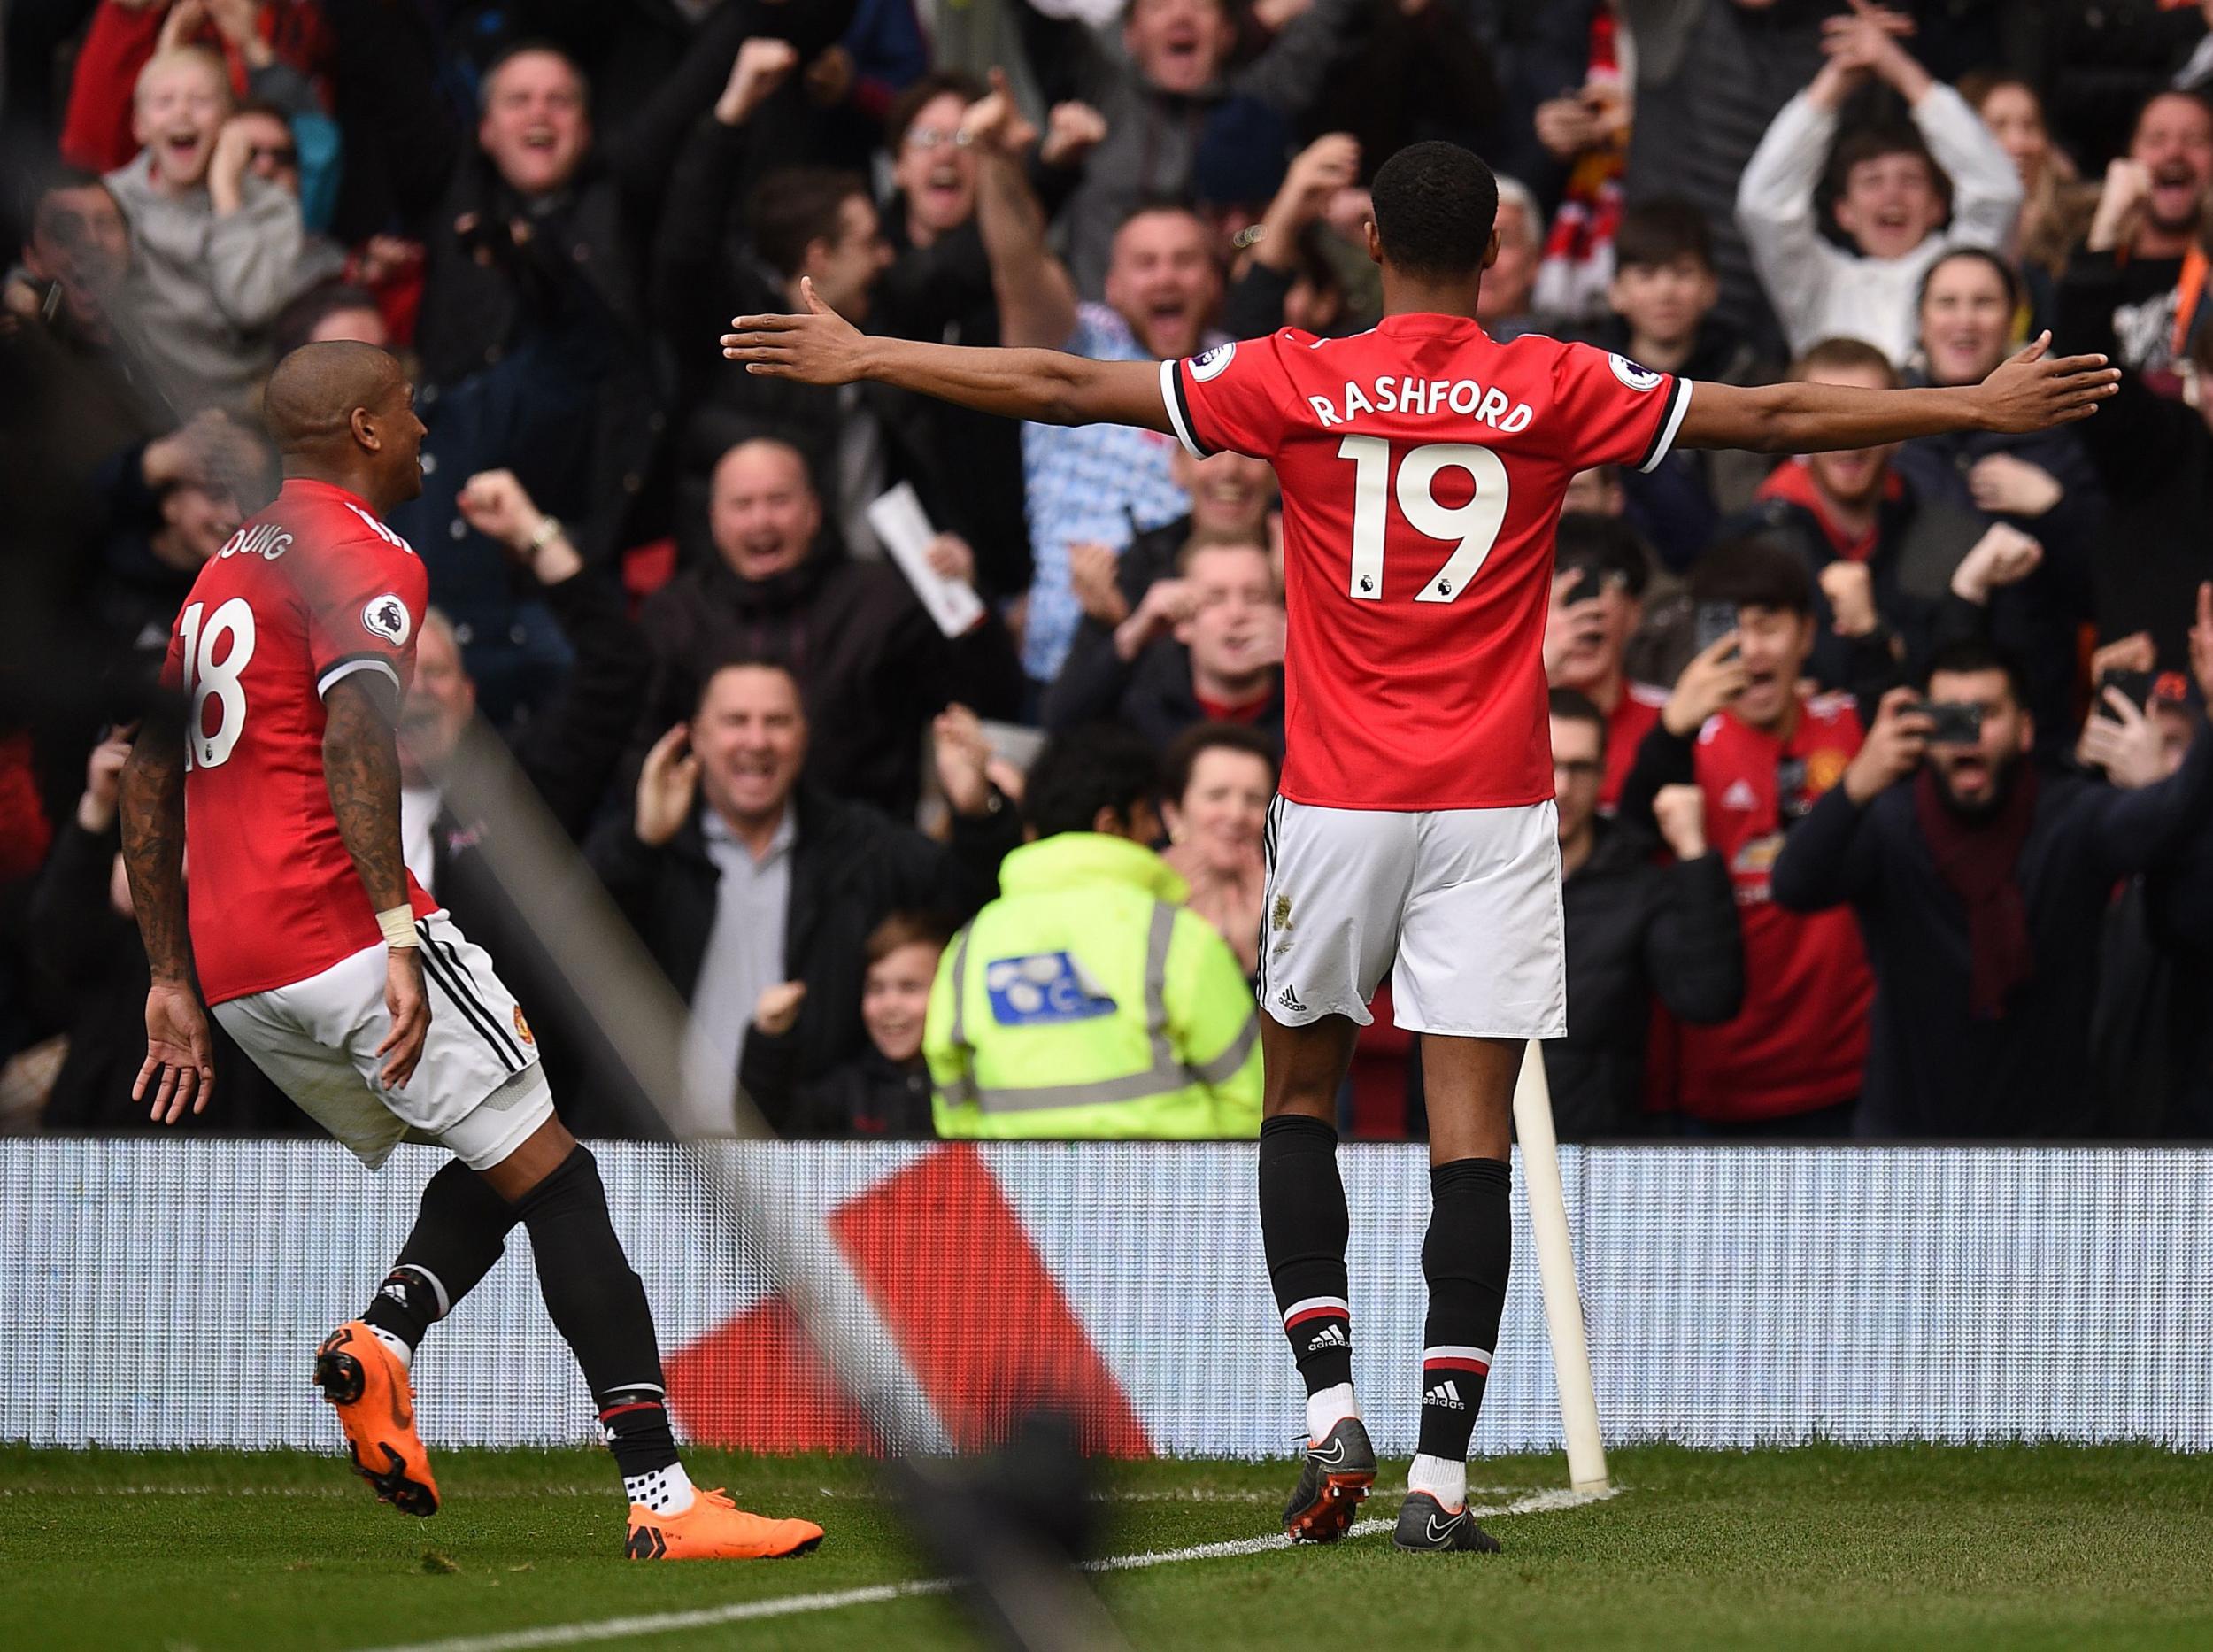 Rashford was the hero on the day with his first Premier League goals of 2018